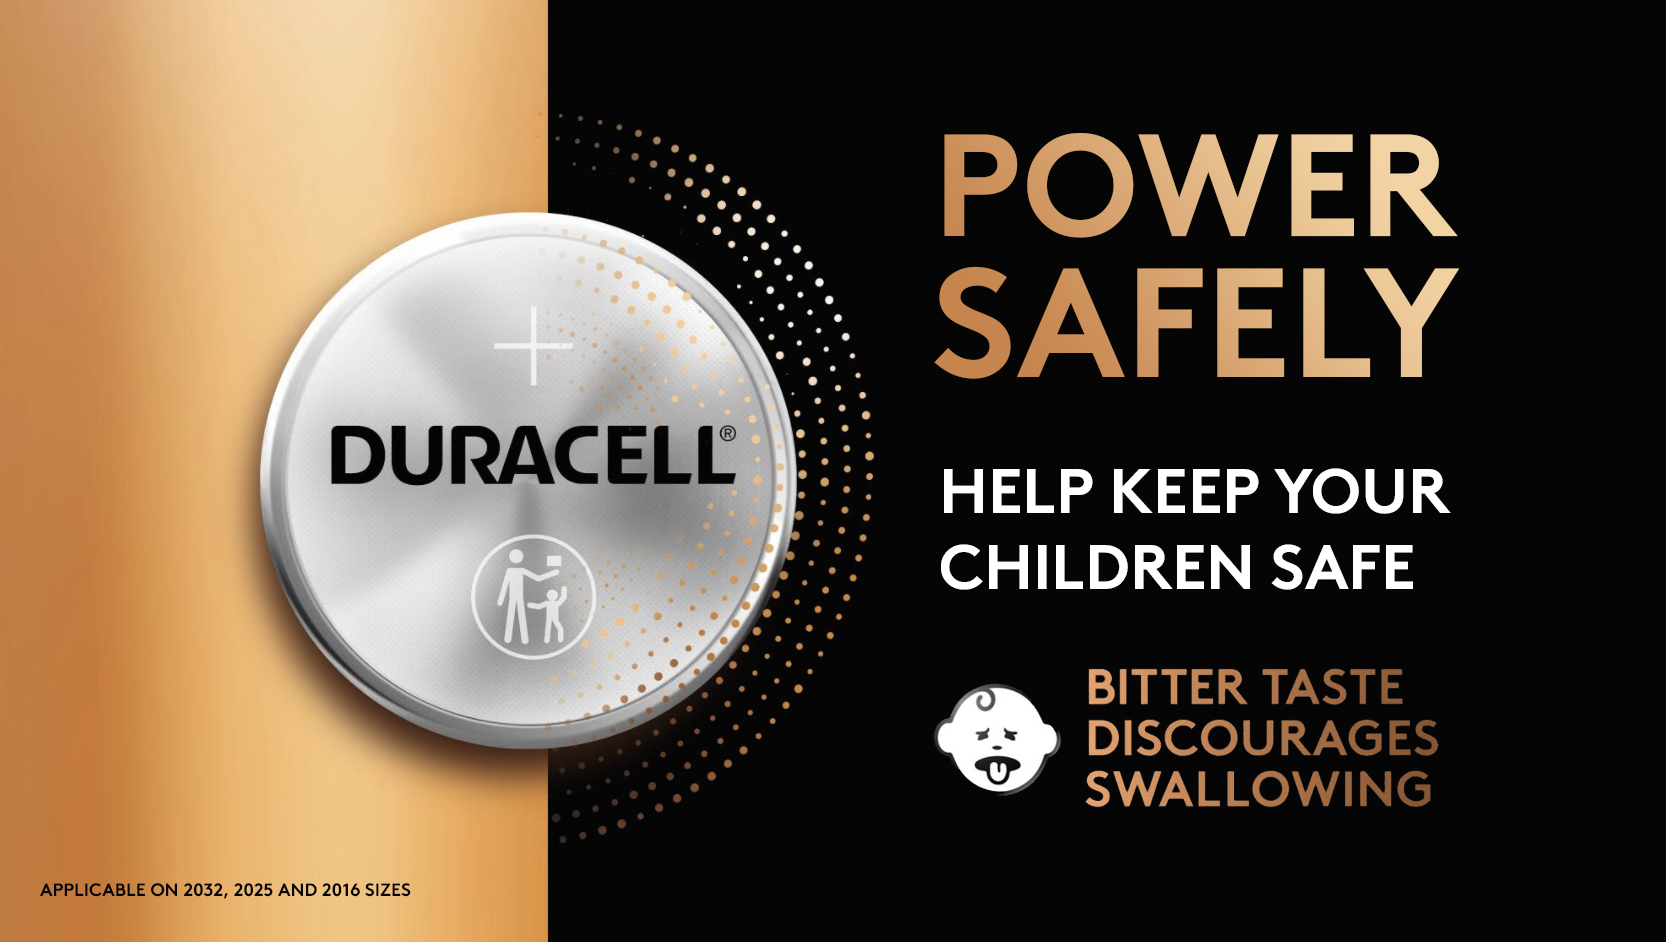  Duracell Specialty 2032 Lithium Coin Battery 3 V, Pack of 4,  with Baby Secure Technology (CR2032) : Everything Else